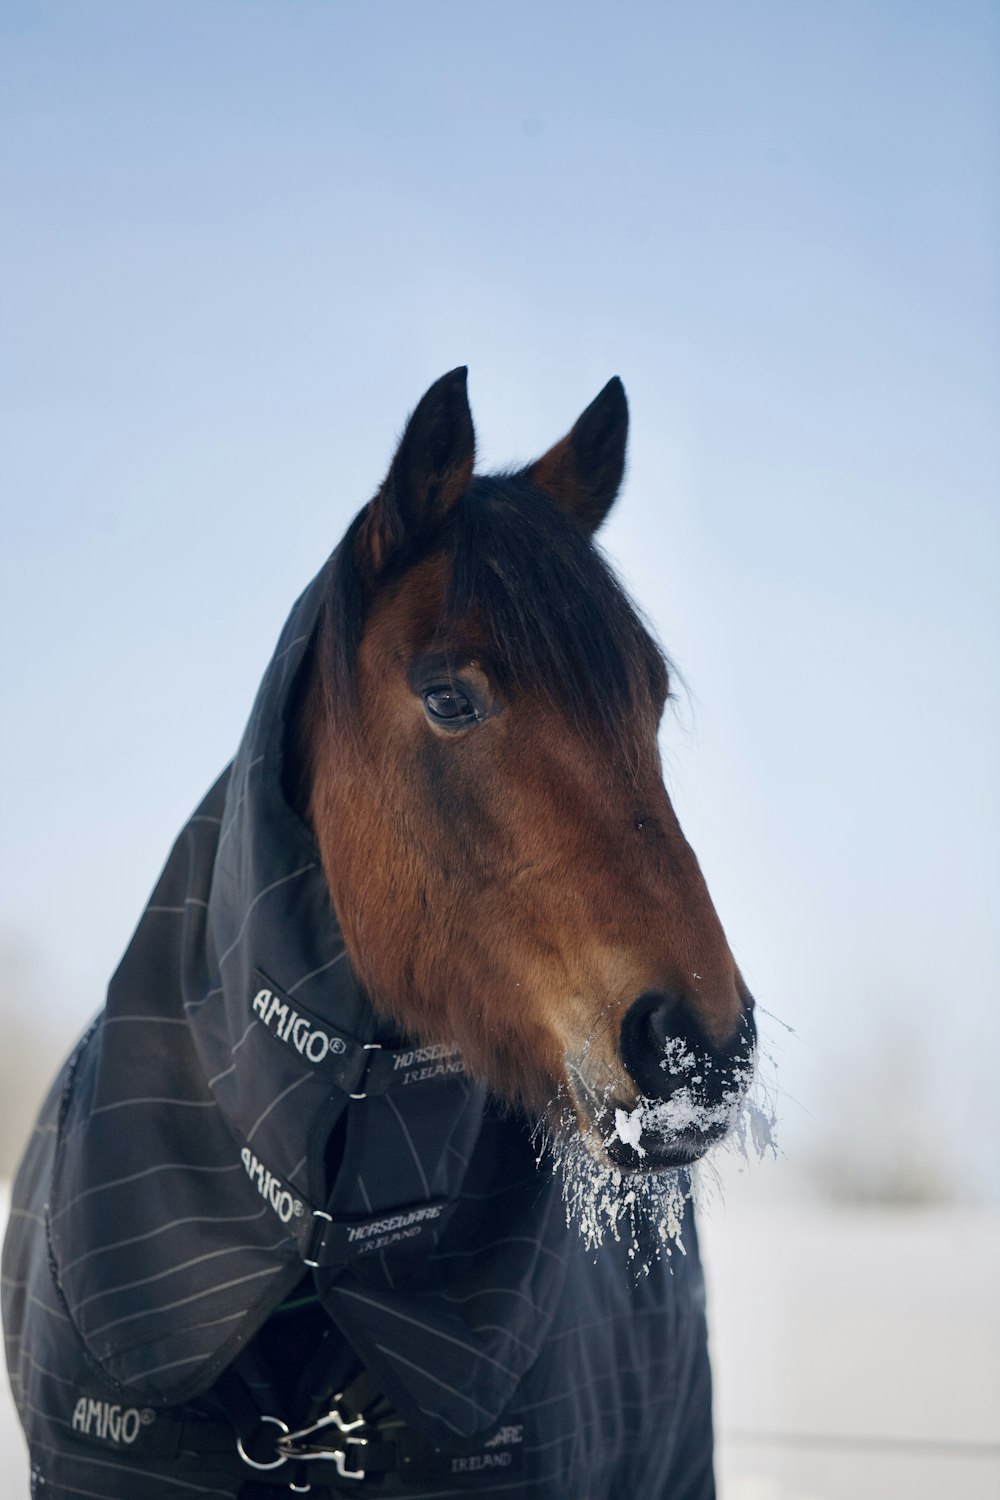 a brown horse wearing a black jacket in the snow